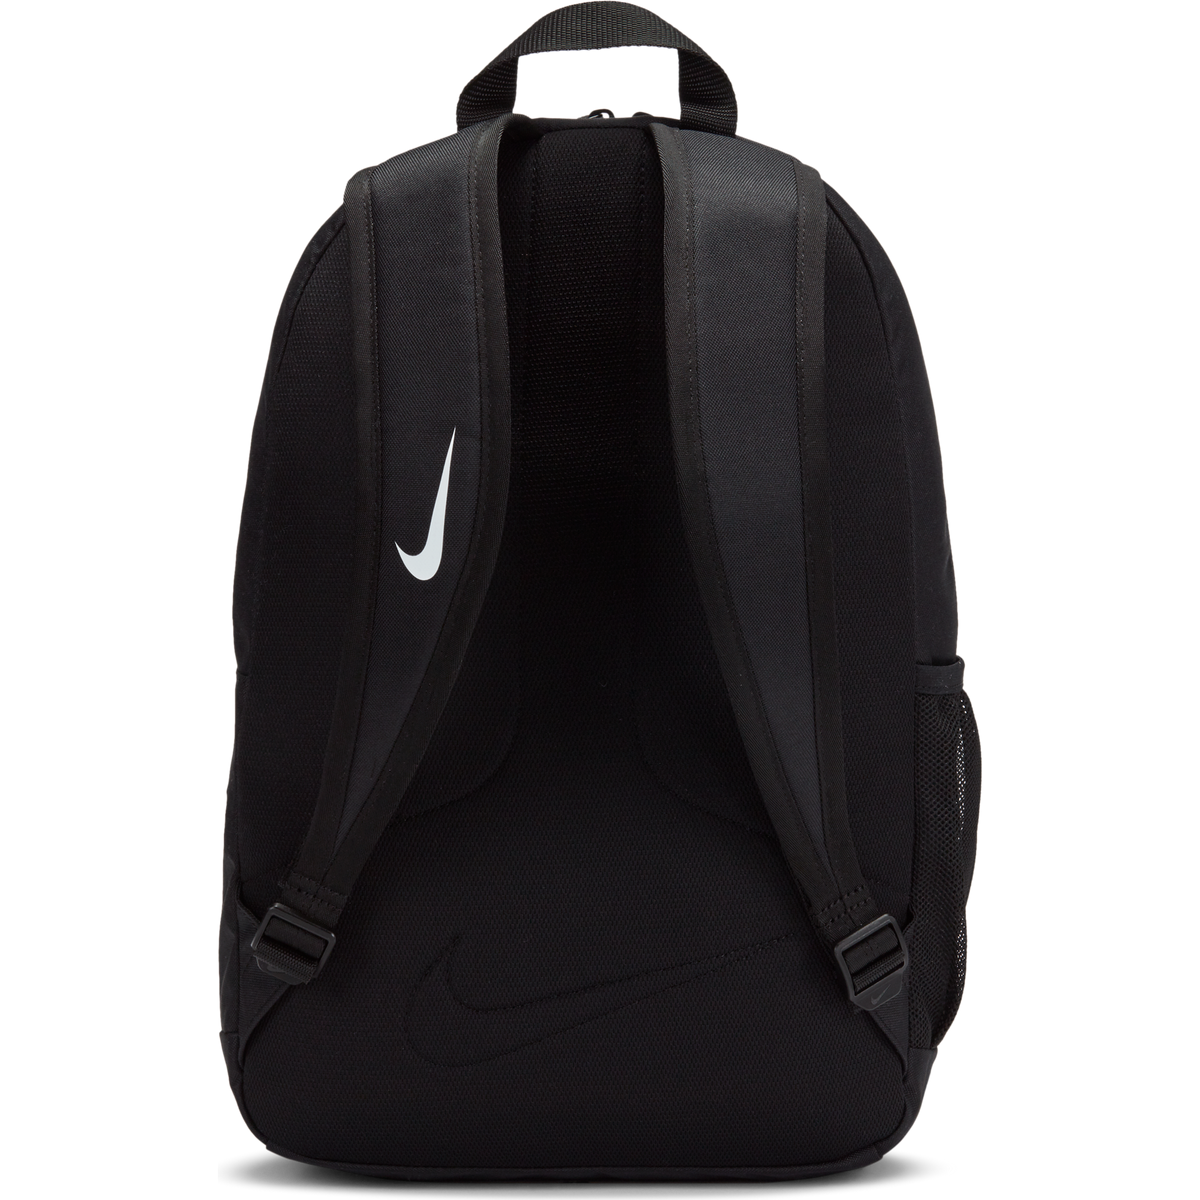 Academy Team Backpack (Youth) 2021